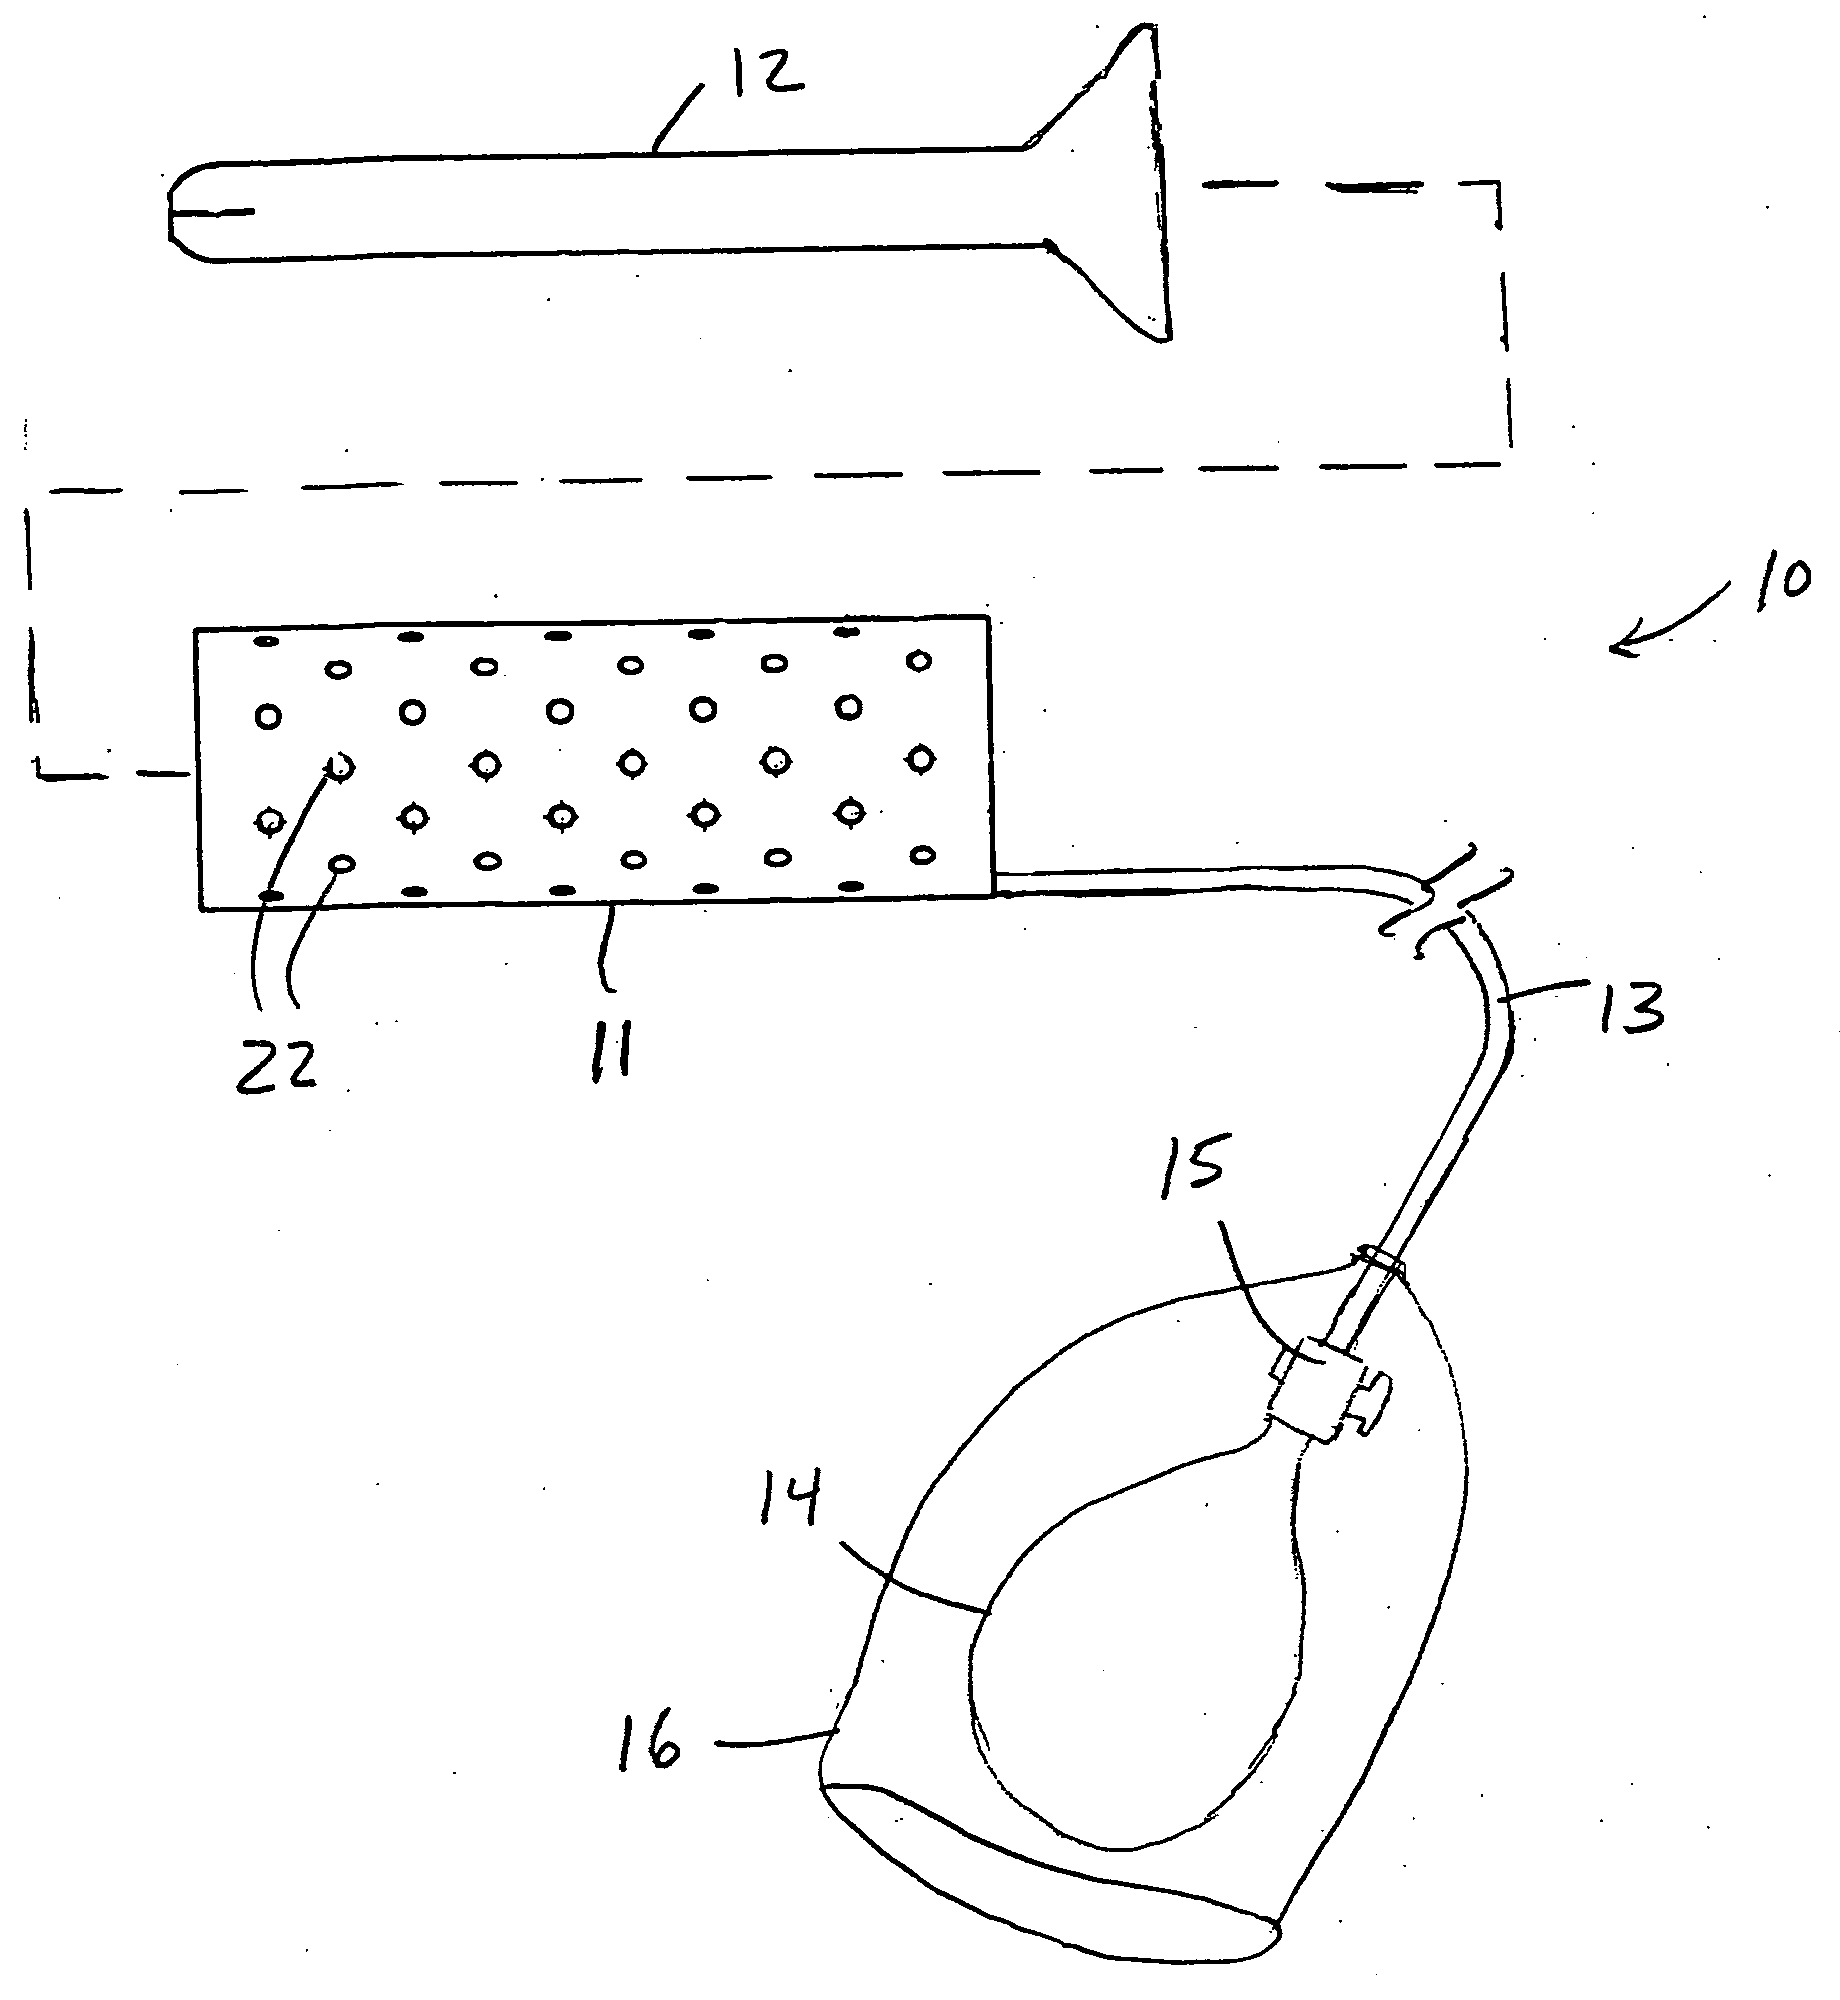 Inflatable apparatus for accessing body cavity and methods of making